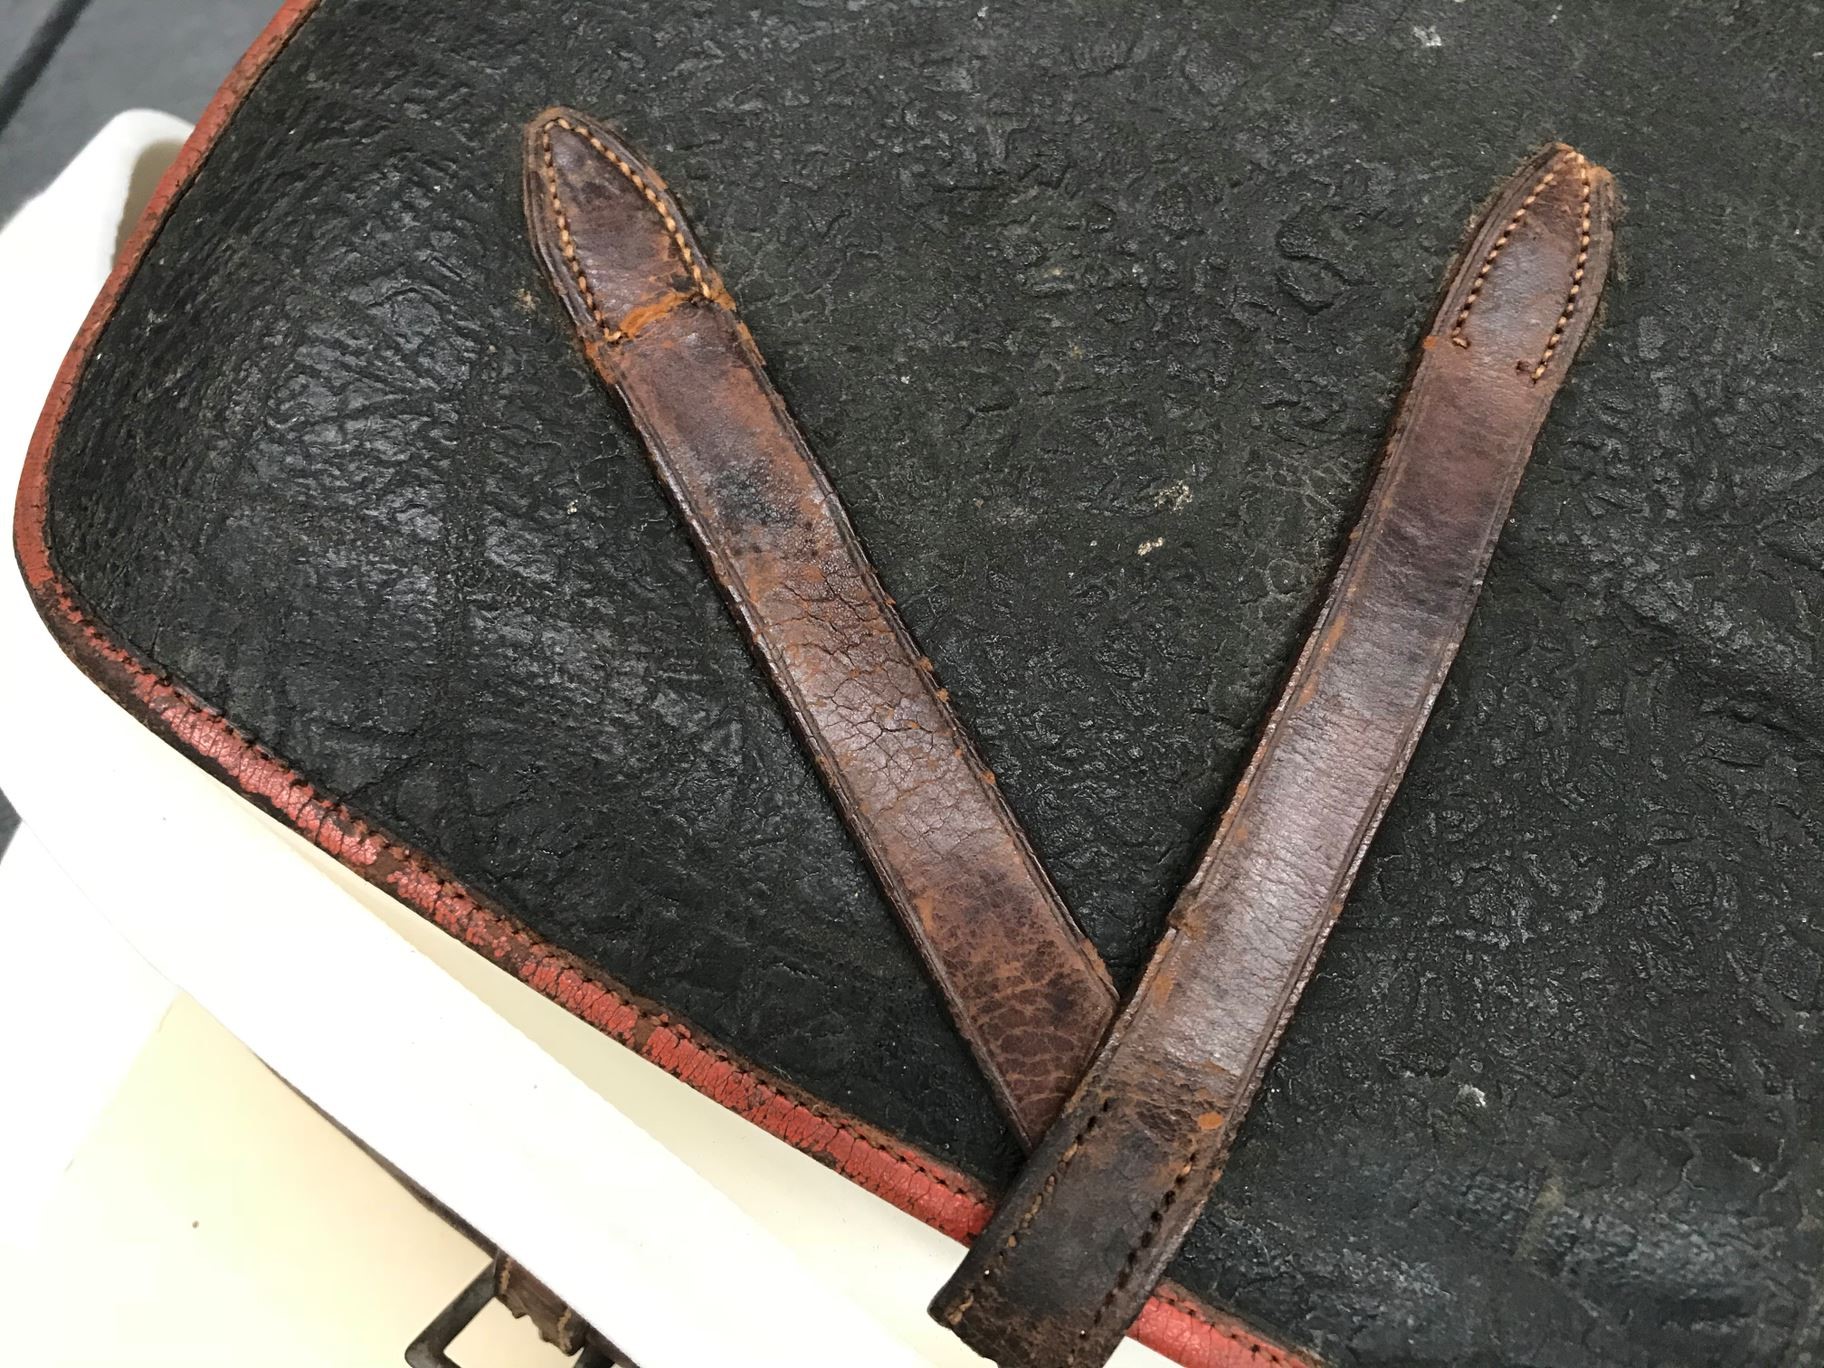 Close up photograph of the bag’s leather straps, now fixed.